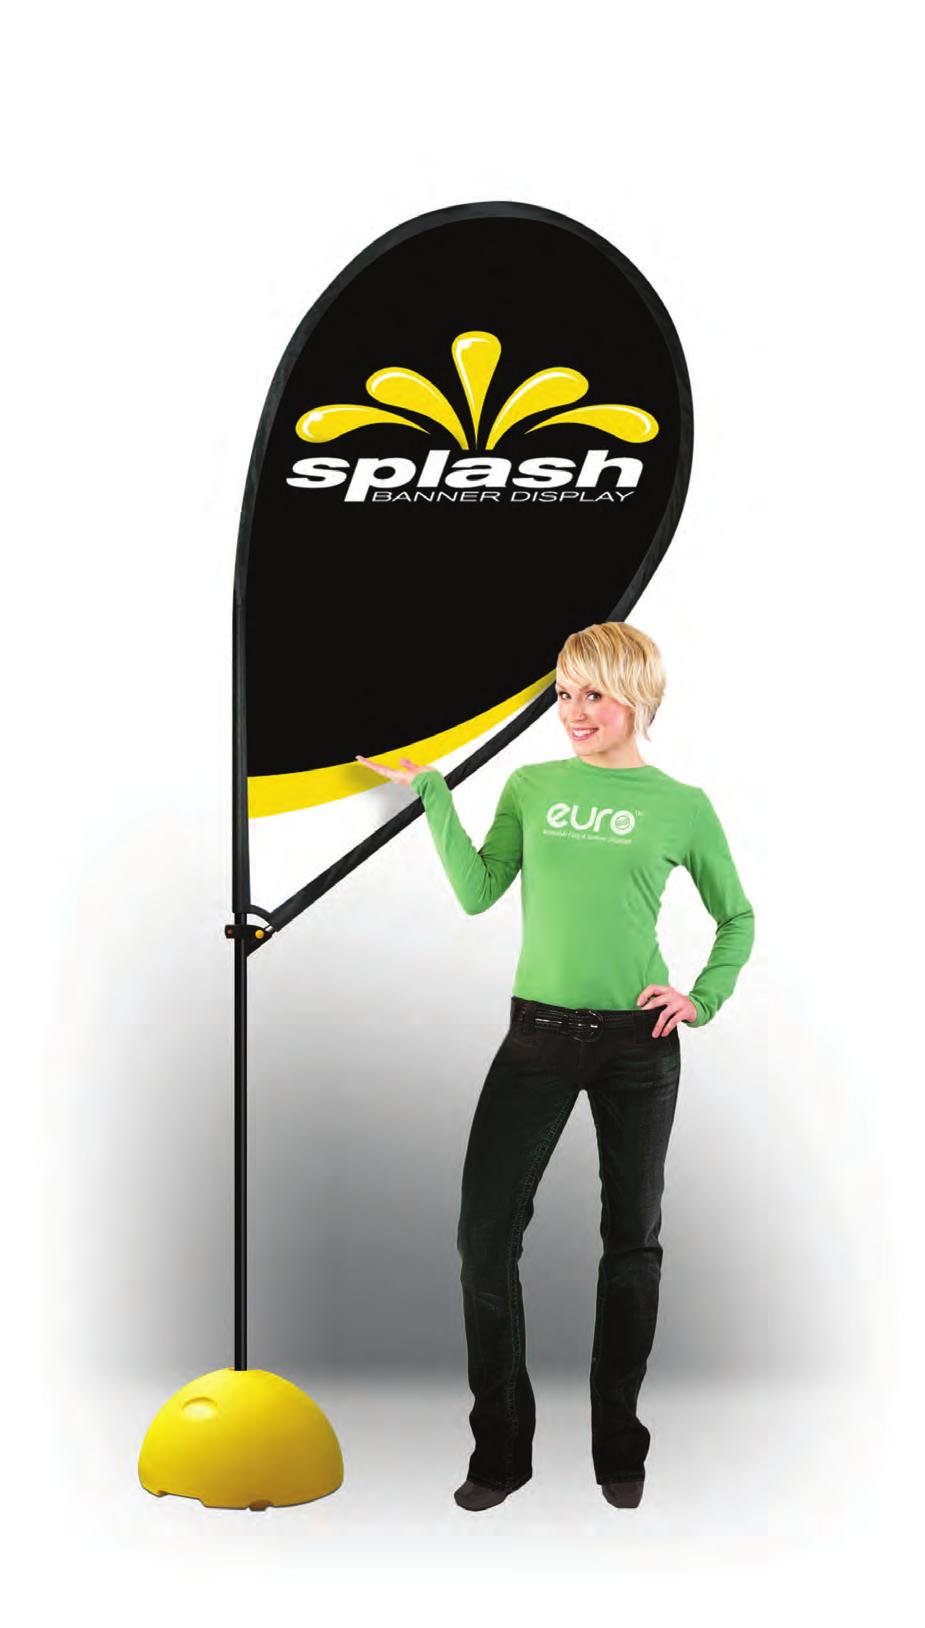 Special tension adjuster ensures a perfect banner fit.